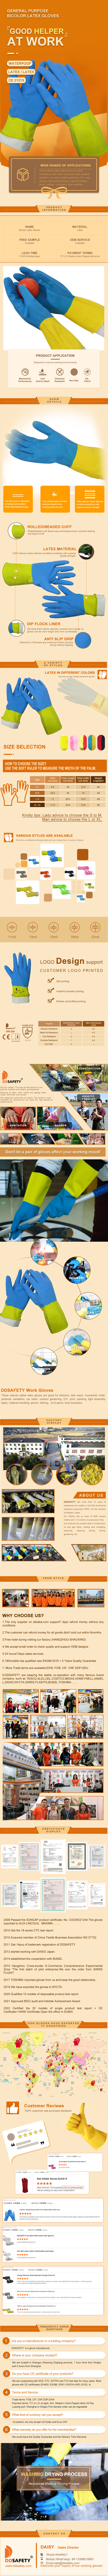 Latex Thick Duty Mechanic Oil Resistant Protective Hand Durable Gloves-DHL224  